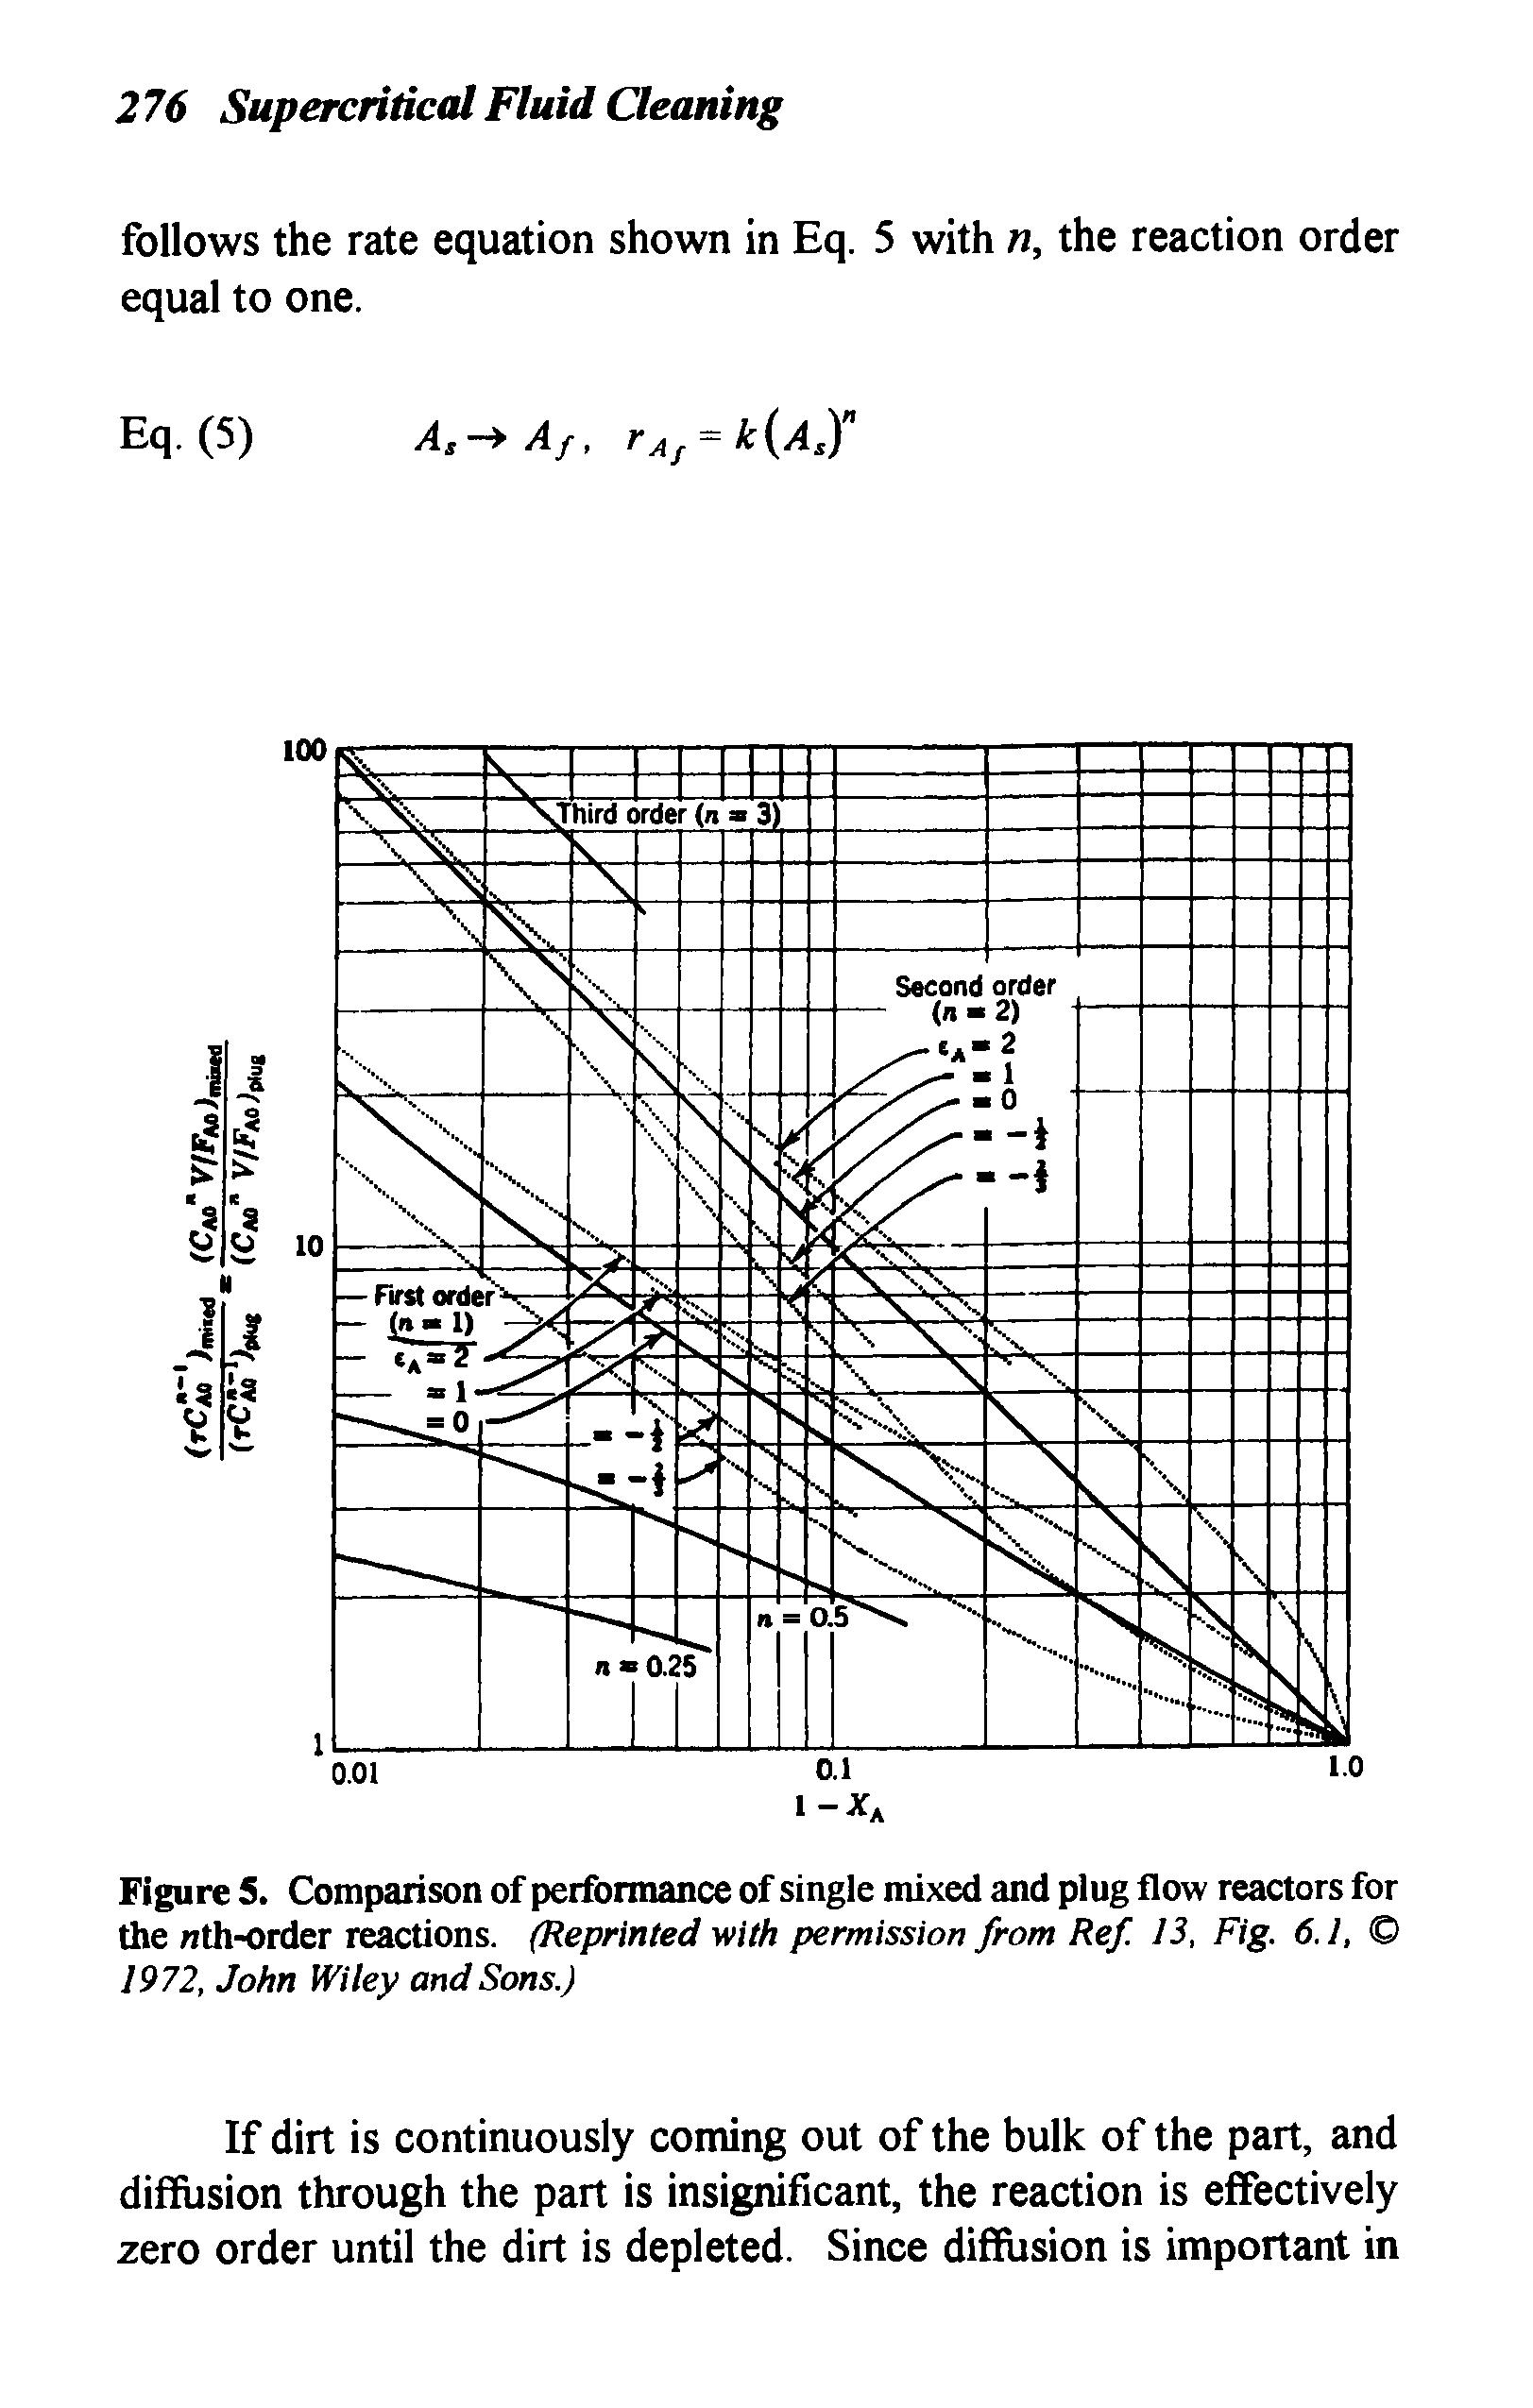 Figure 5. Comparison of performance of single mixed and plug flow reactors for the nth-order reactions. (Reprinted with permission from Ref 13, Fig. 6.1, 1972, John Wiley and Sons.)...